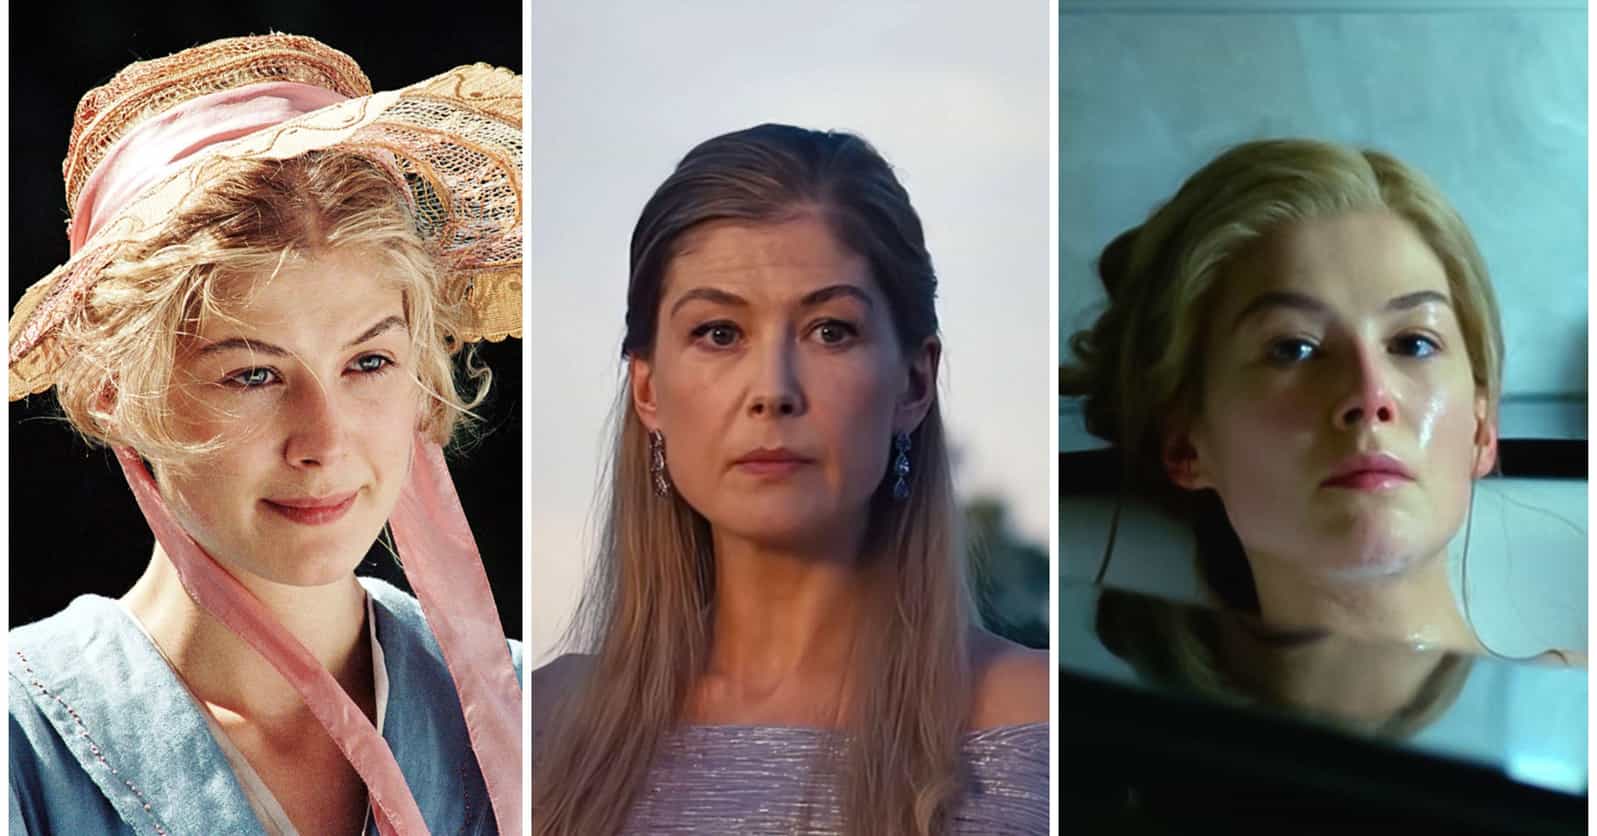 16 Rosamund Pike Movies And TV Shows That Prove She’s Got The Range